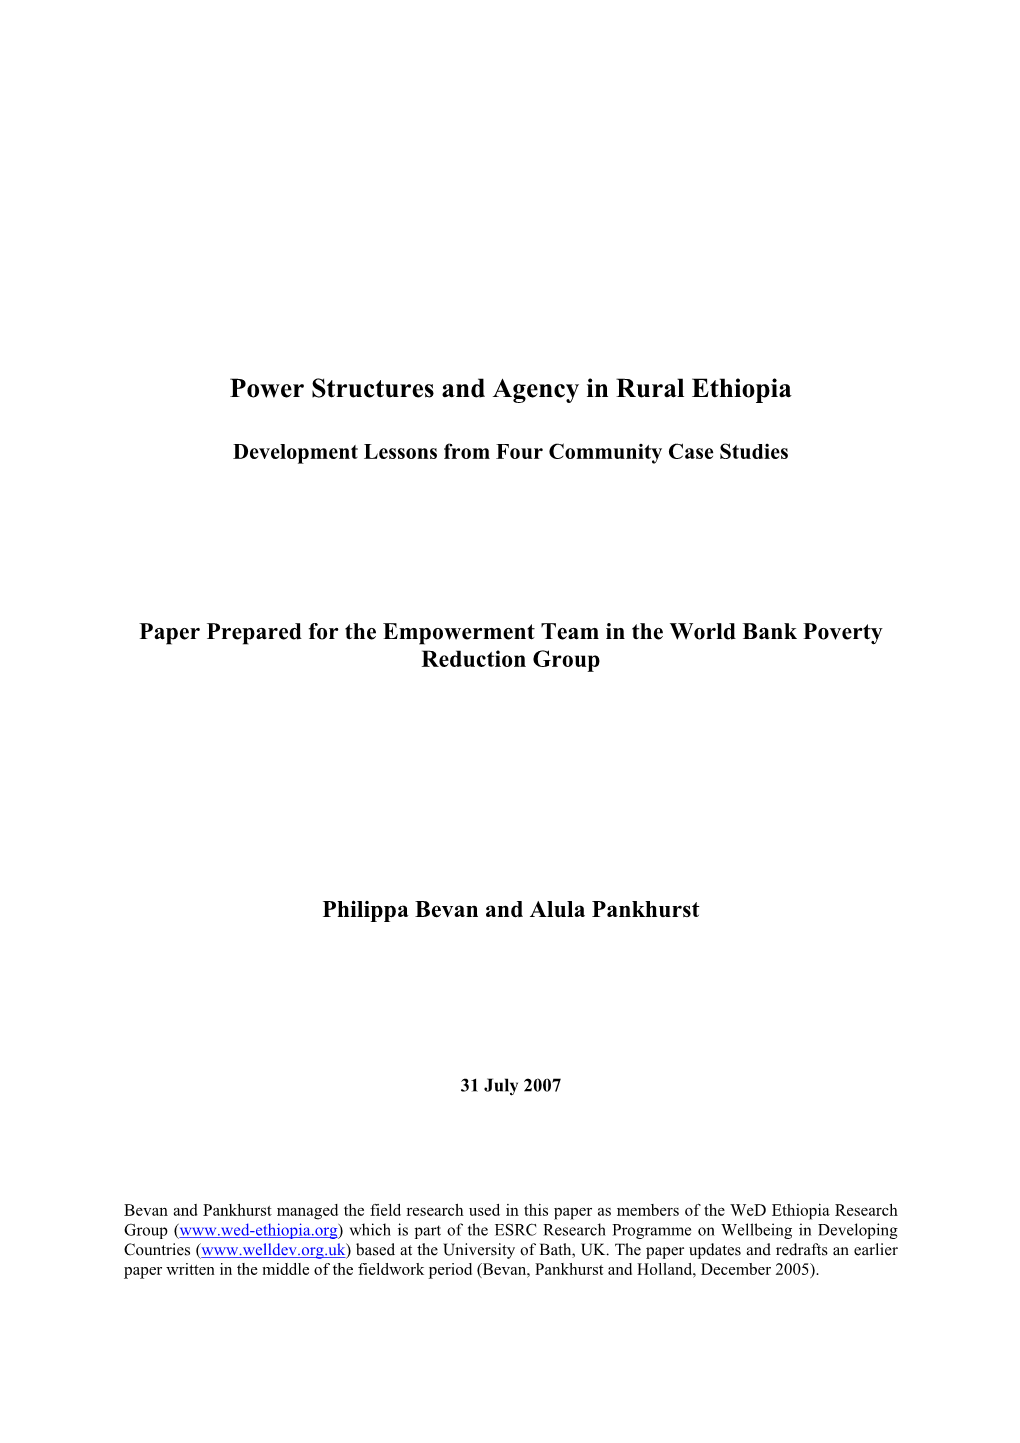 Power Structures and Agency in Rural Ethiopia